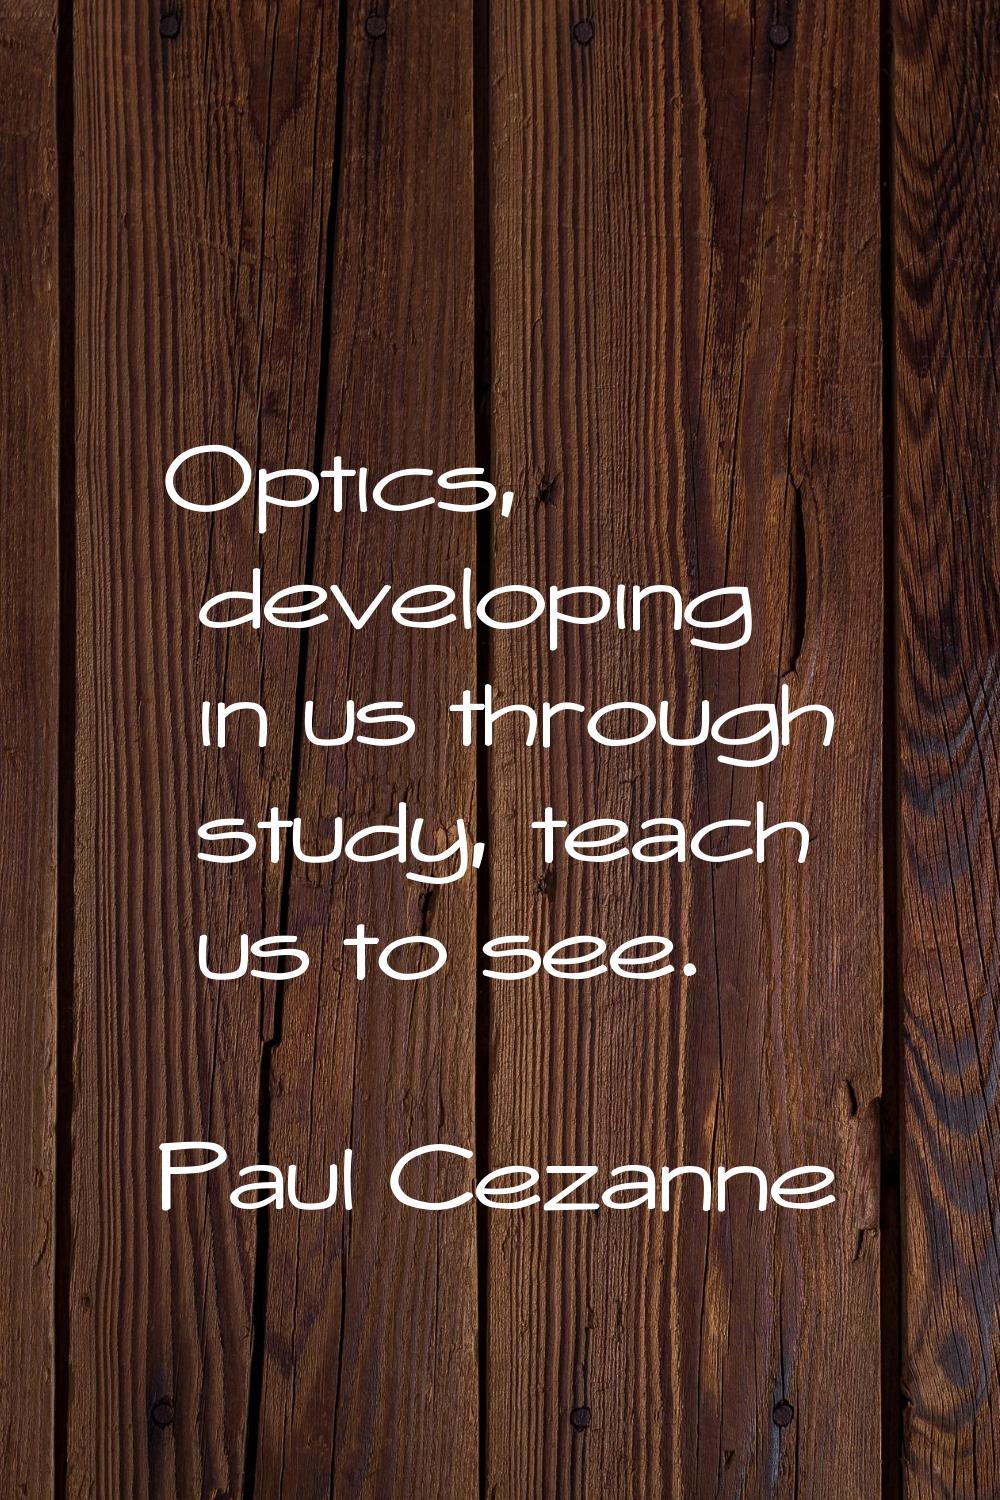 Optics, developing in us through study, teach us to see.